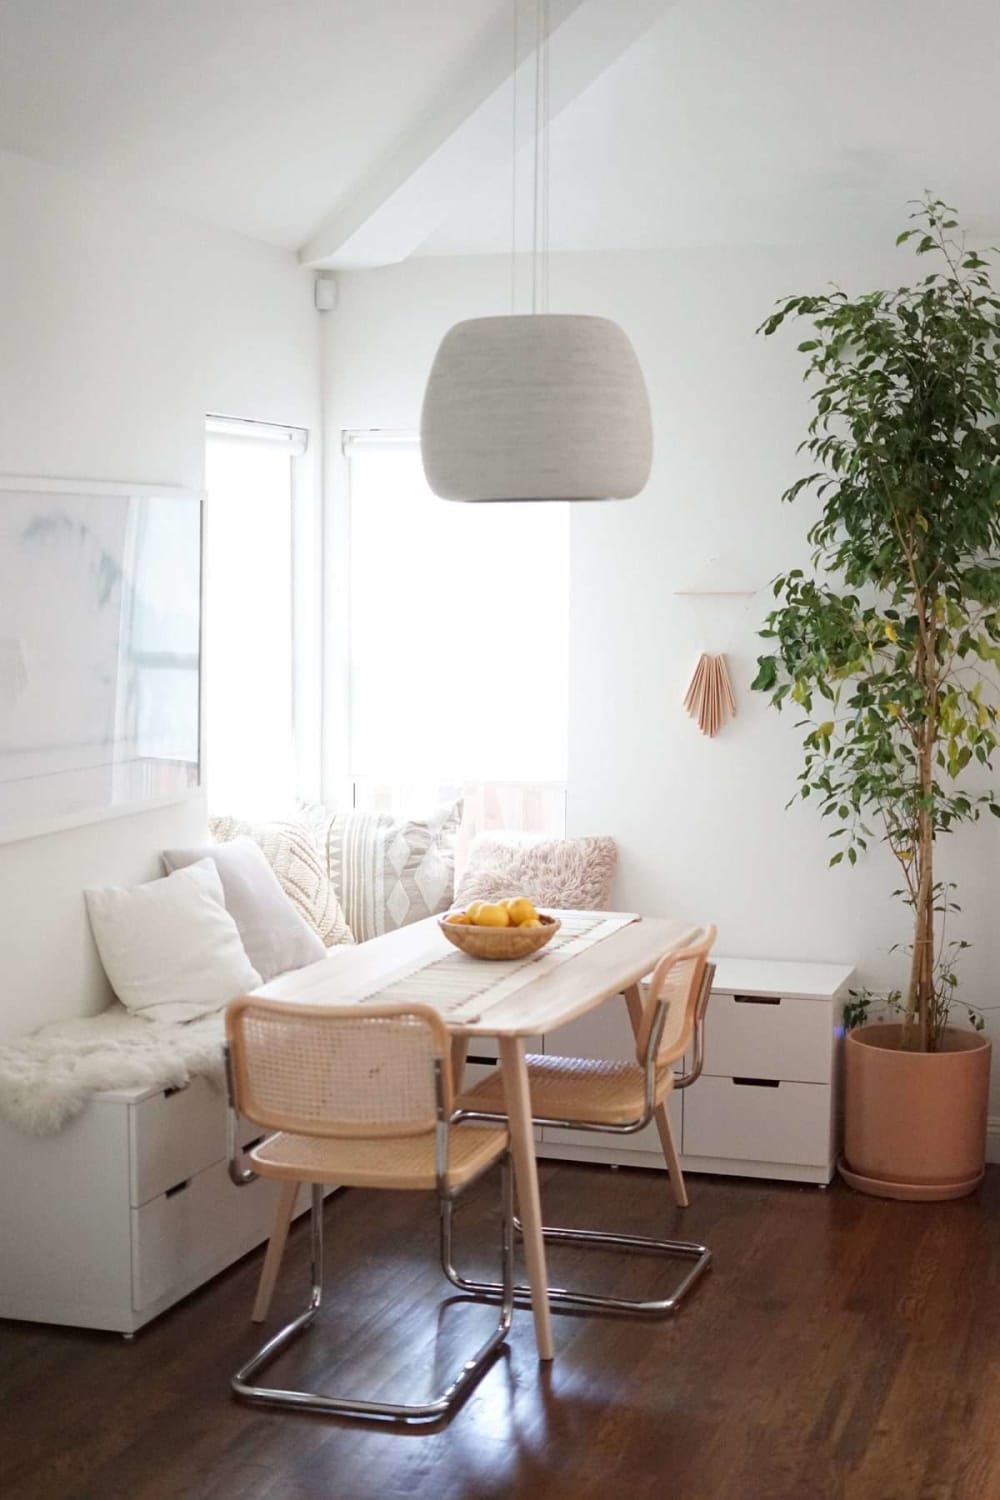 5 IKEA Hacks for Organizing Small Spaces